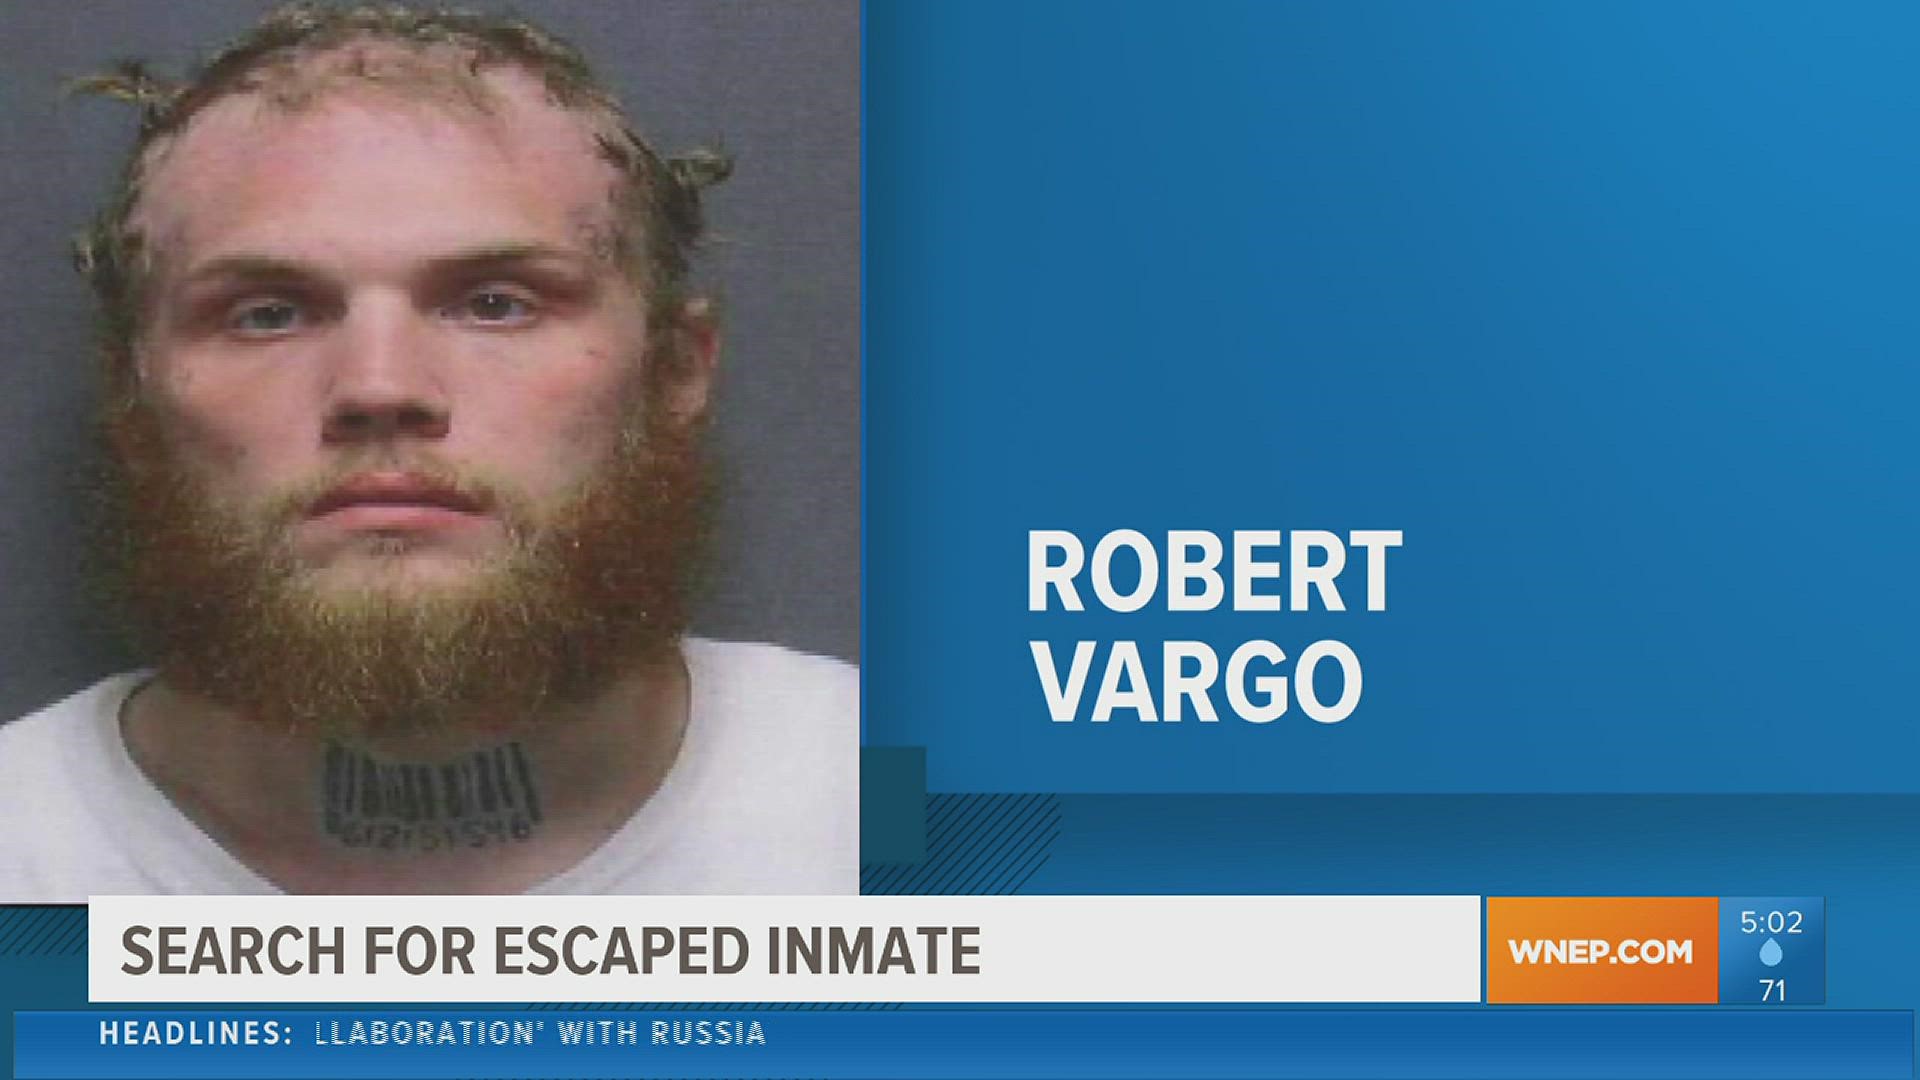 Police in Luzerne County are looking for an inmate who escaped Sunday morning.